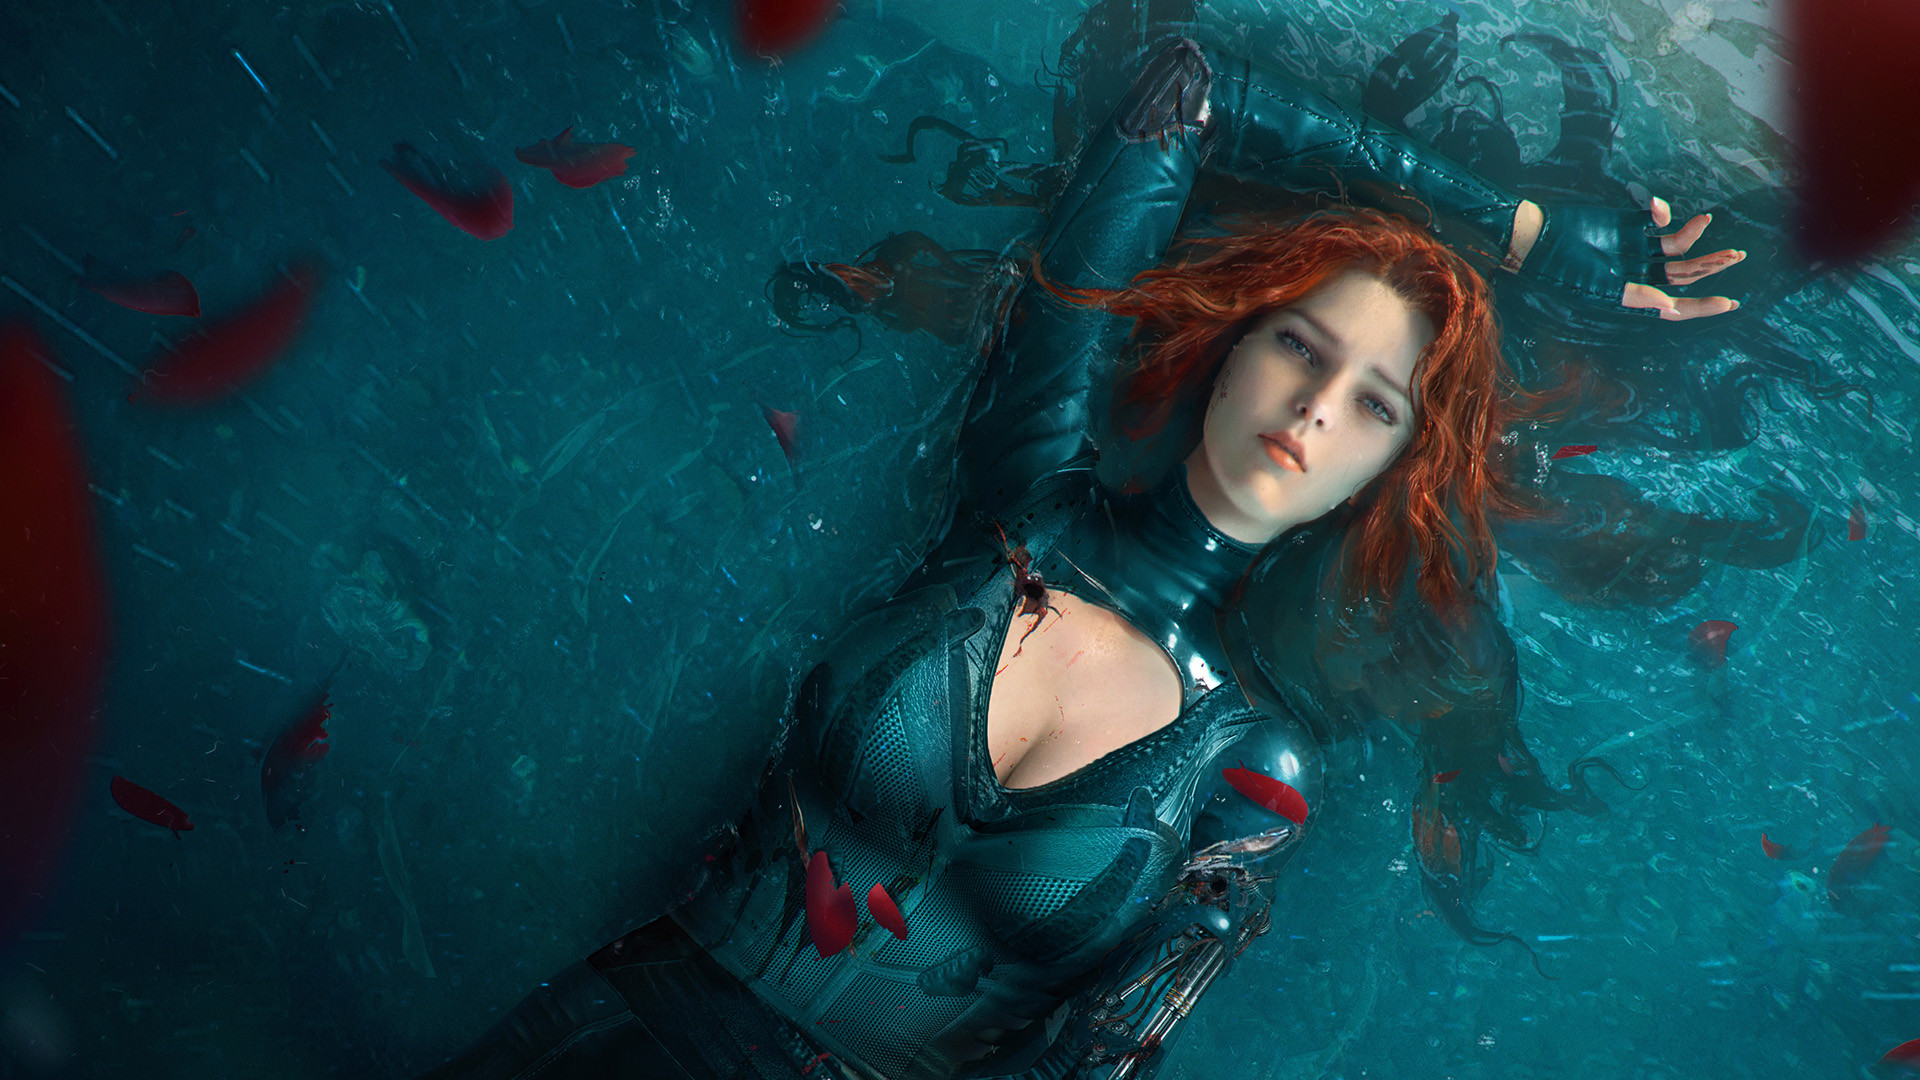 Free download wallpaper Sci Fi, Cyborg, Red Hair, Lying Down on your PC desktop